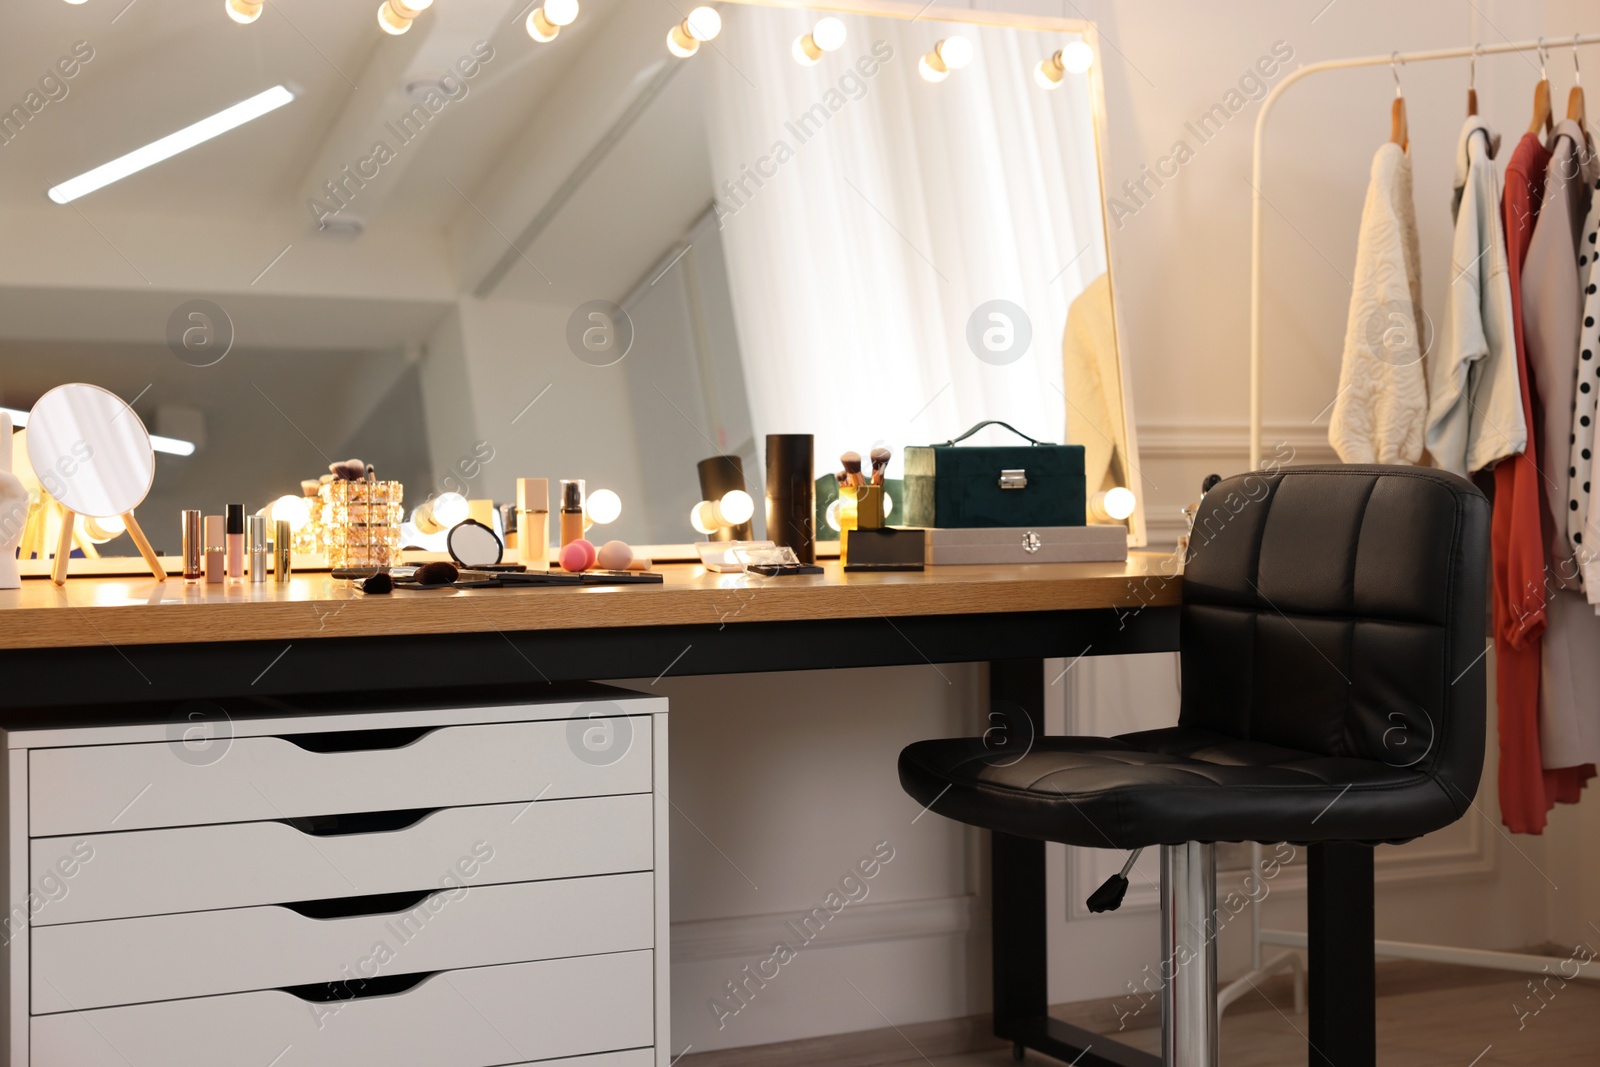 Photo of Makeup room. Stylish dressing table with mirror, chair and clothes rack